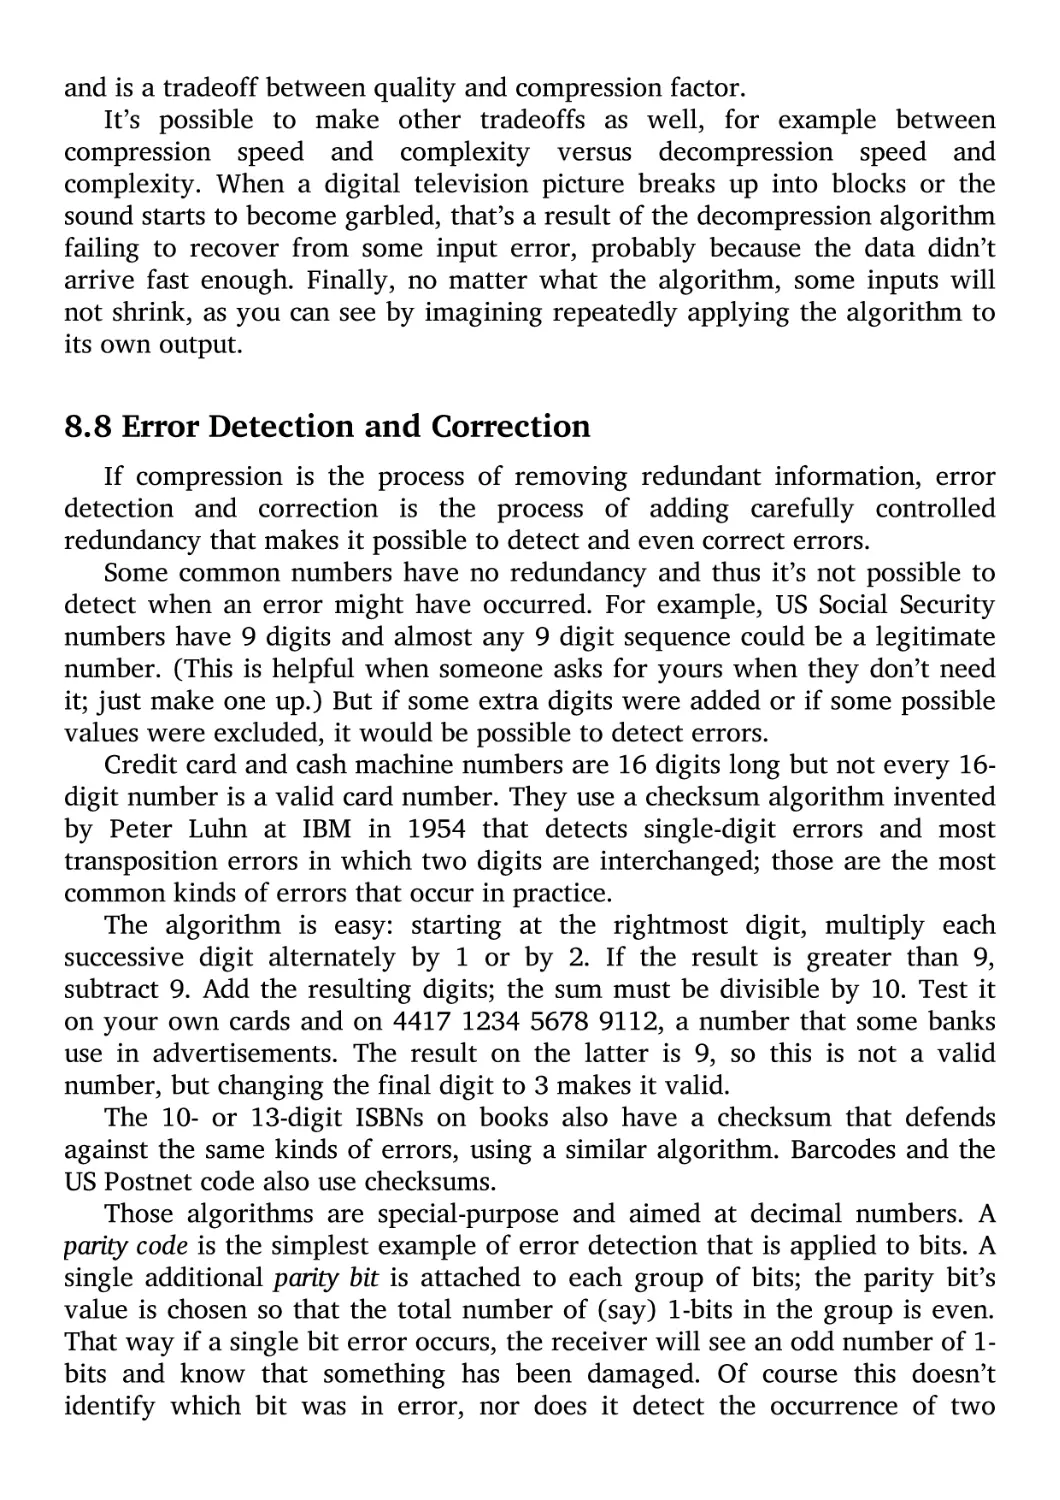 8.8 Error Detection and Correction